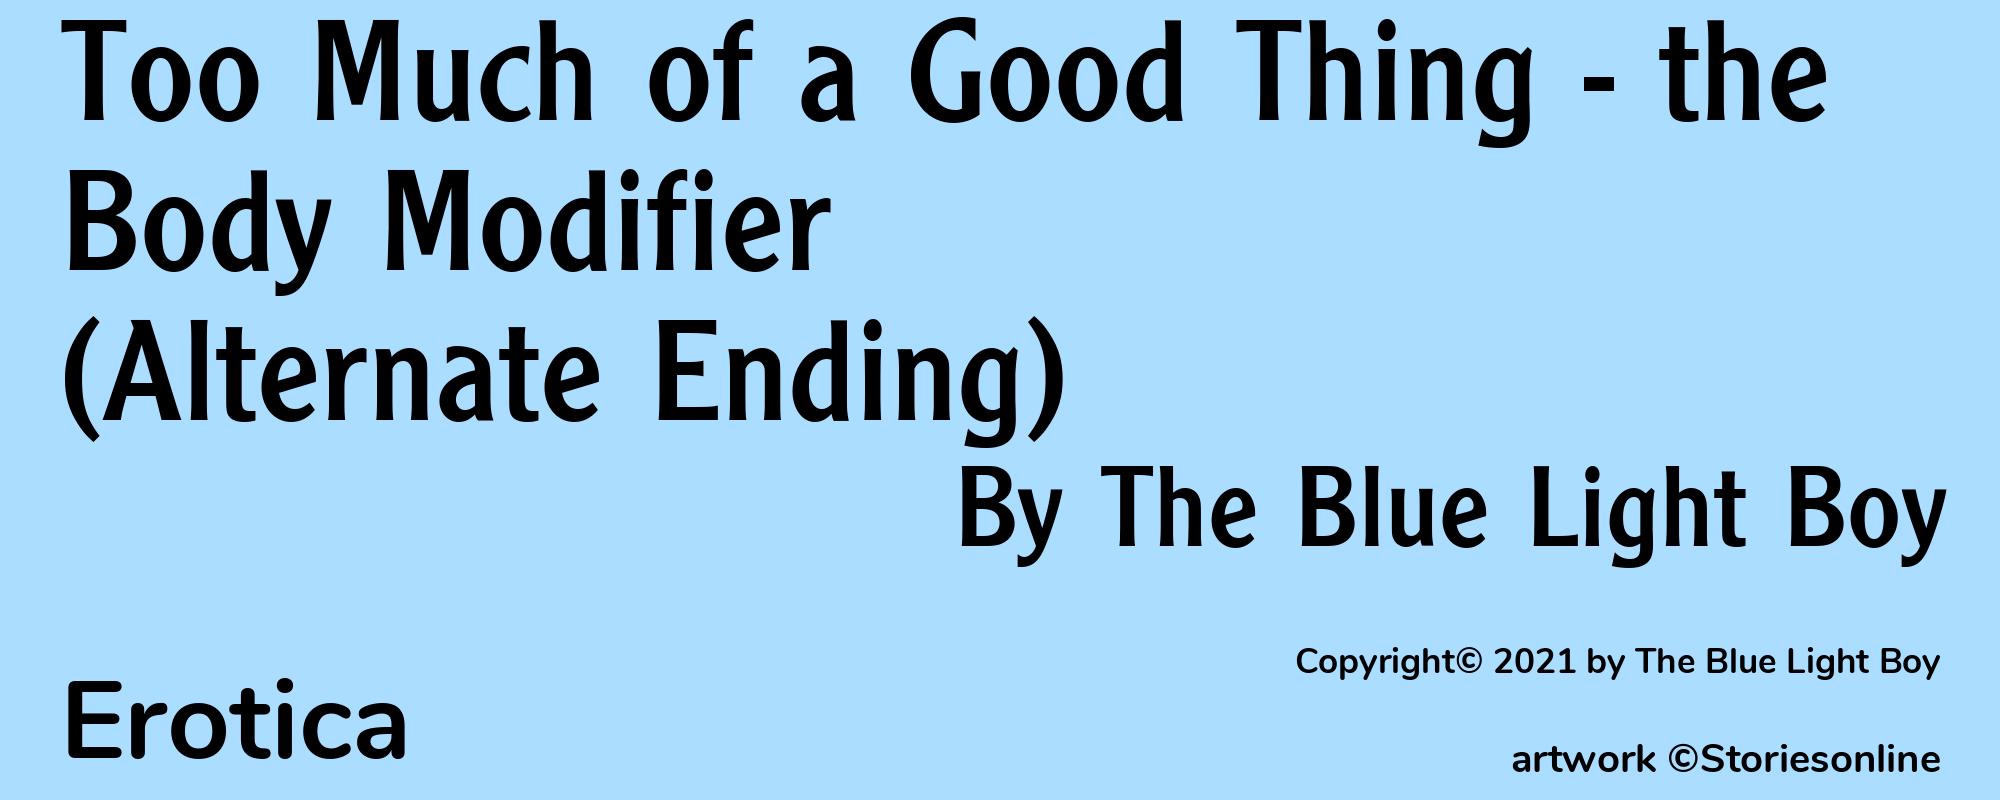 Too Much of a Good Thing - the Body Modifier (Alternate Ending) - Cover